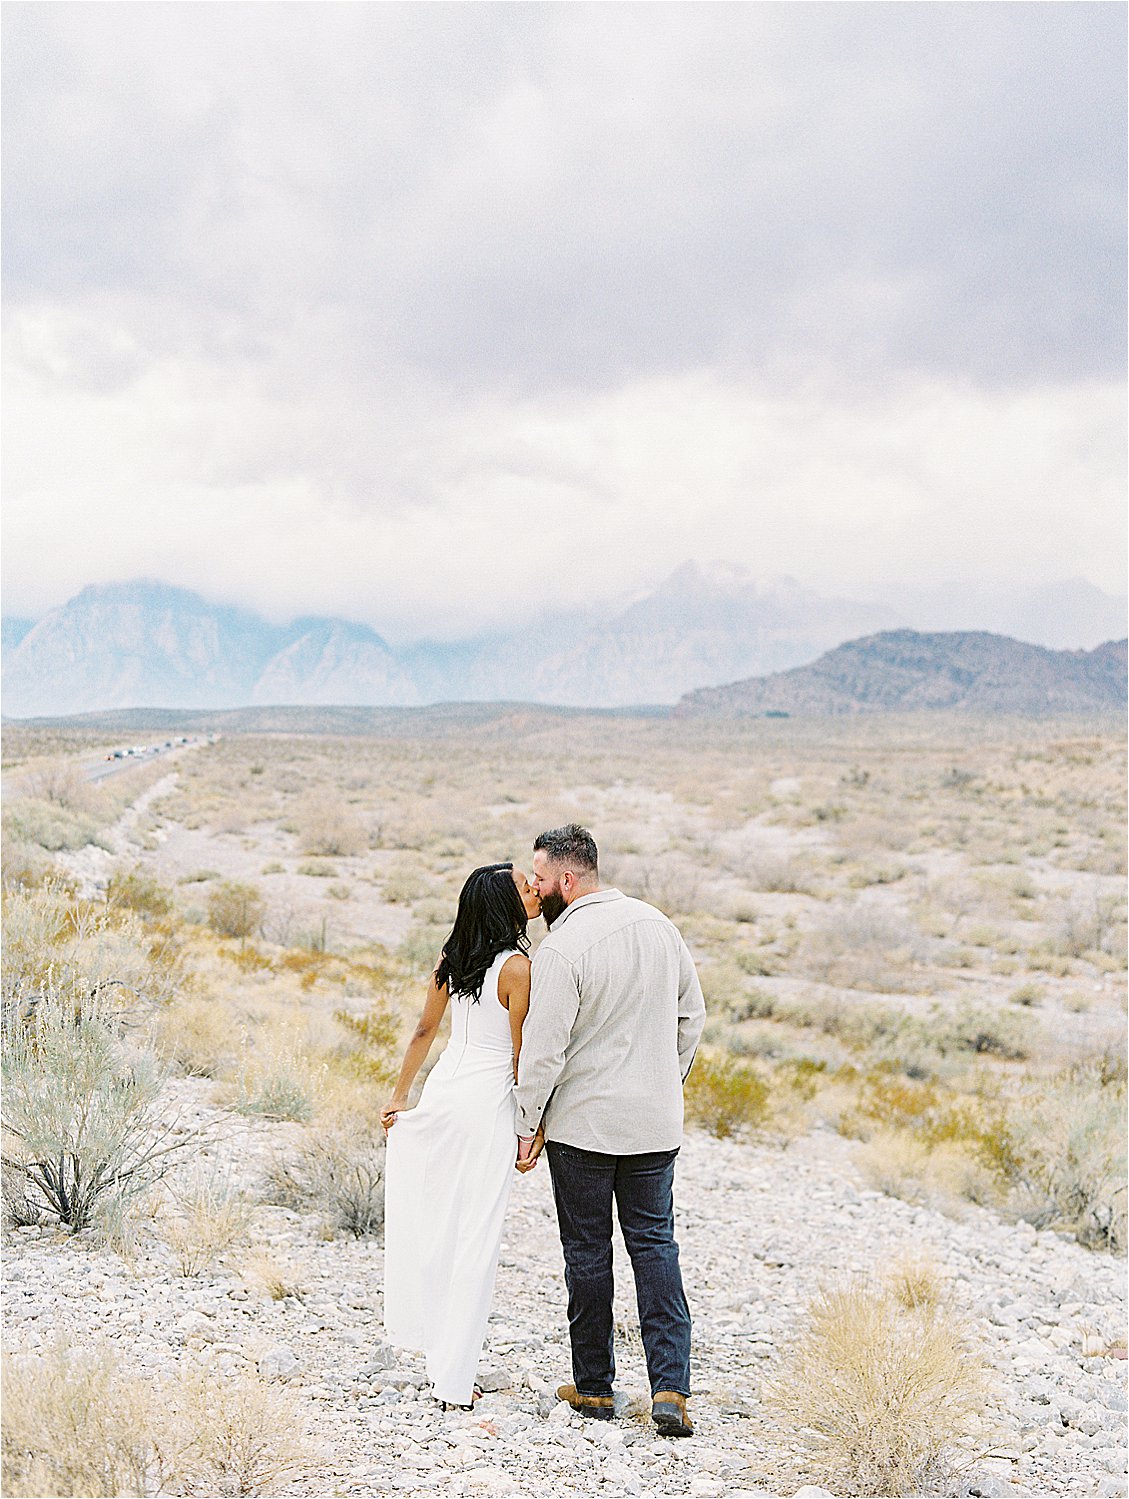 Intimate Weddings & Elopements with Destination Film Wedding Photographer, Renee Hollingshead. The wedding industry shifts to micro weddings during COVID-19 Pandemic, forcing couples to consider smaller celebrations. Las Vegas Elopement at A Little White Wedding Chapel